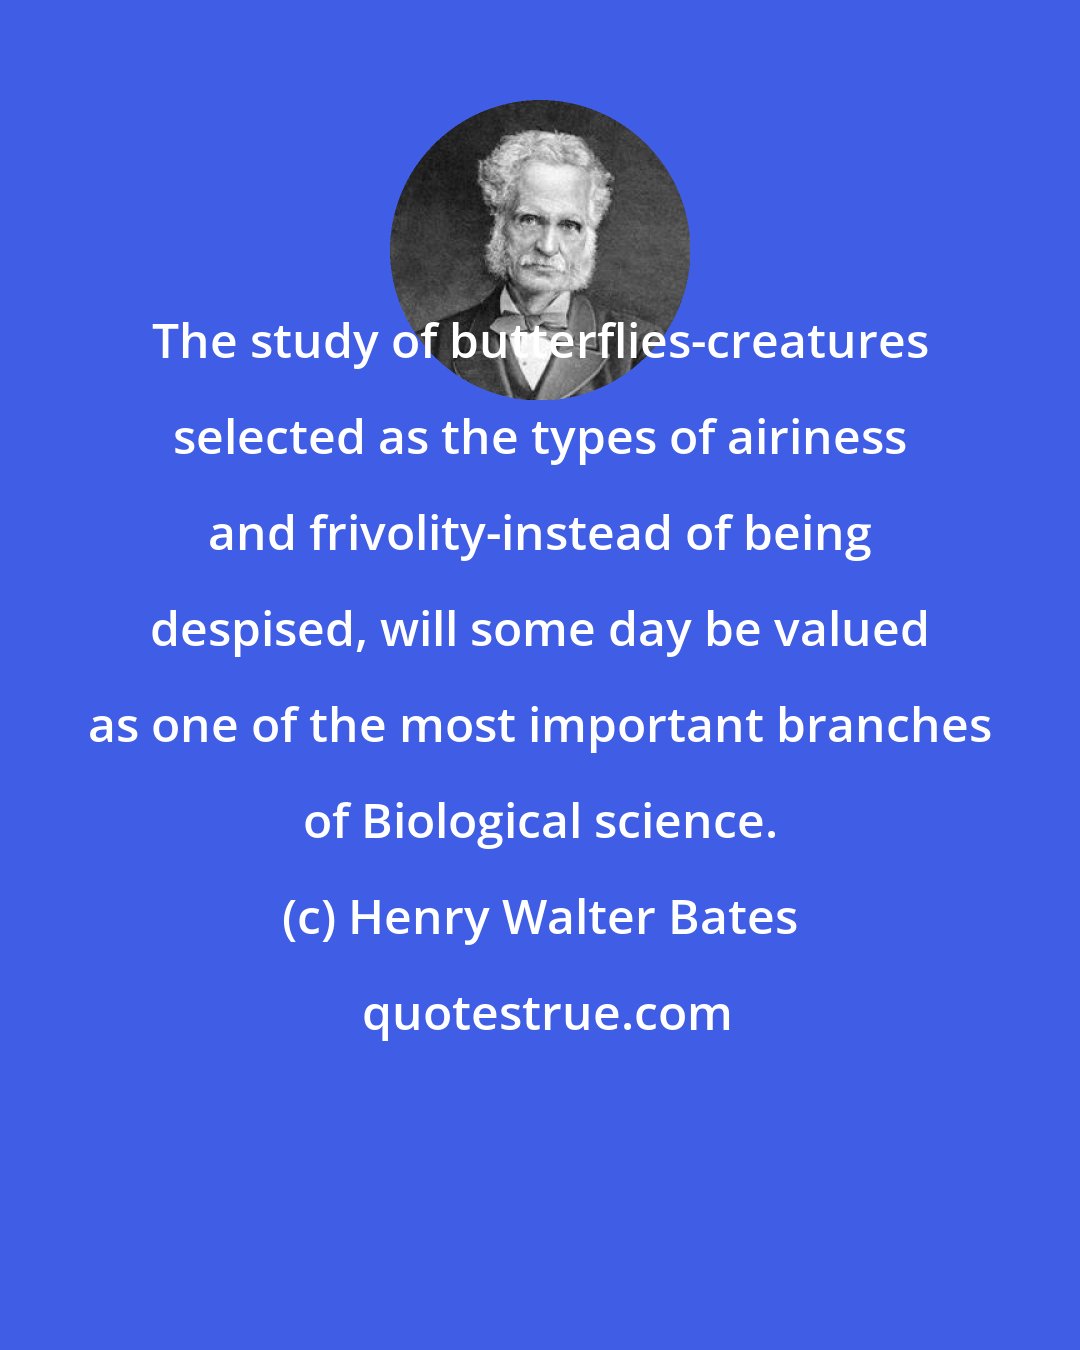 Henry Walter Bates: The study of butterflies-creatures selected as the types of airiness and frivolity-instead of being despised, will some day be valued as one of the most important branches of Biological science.